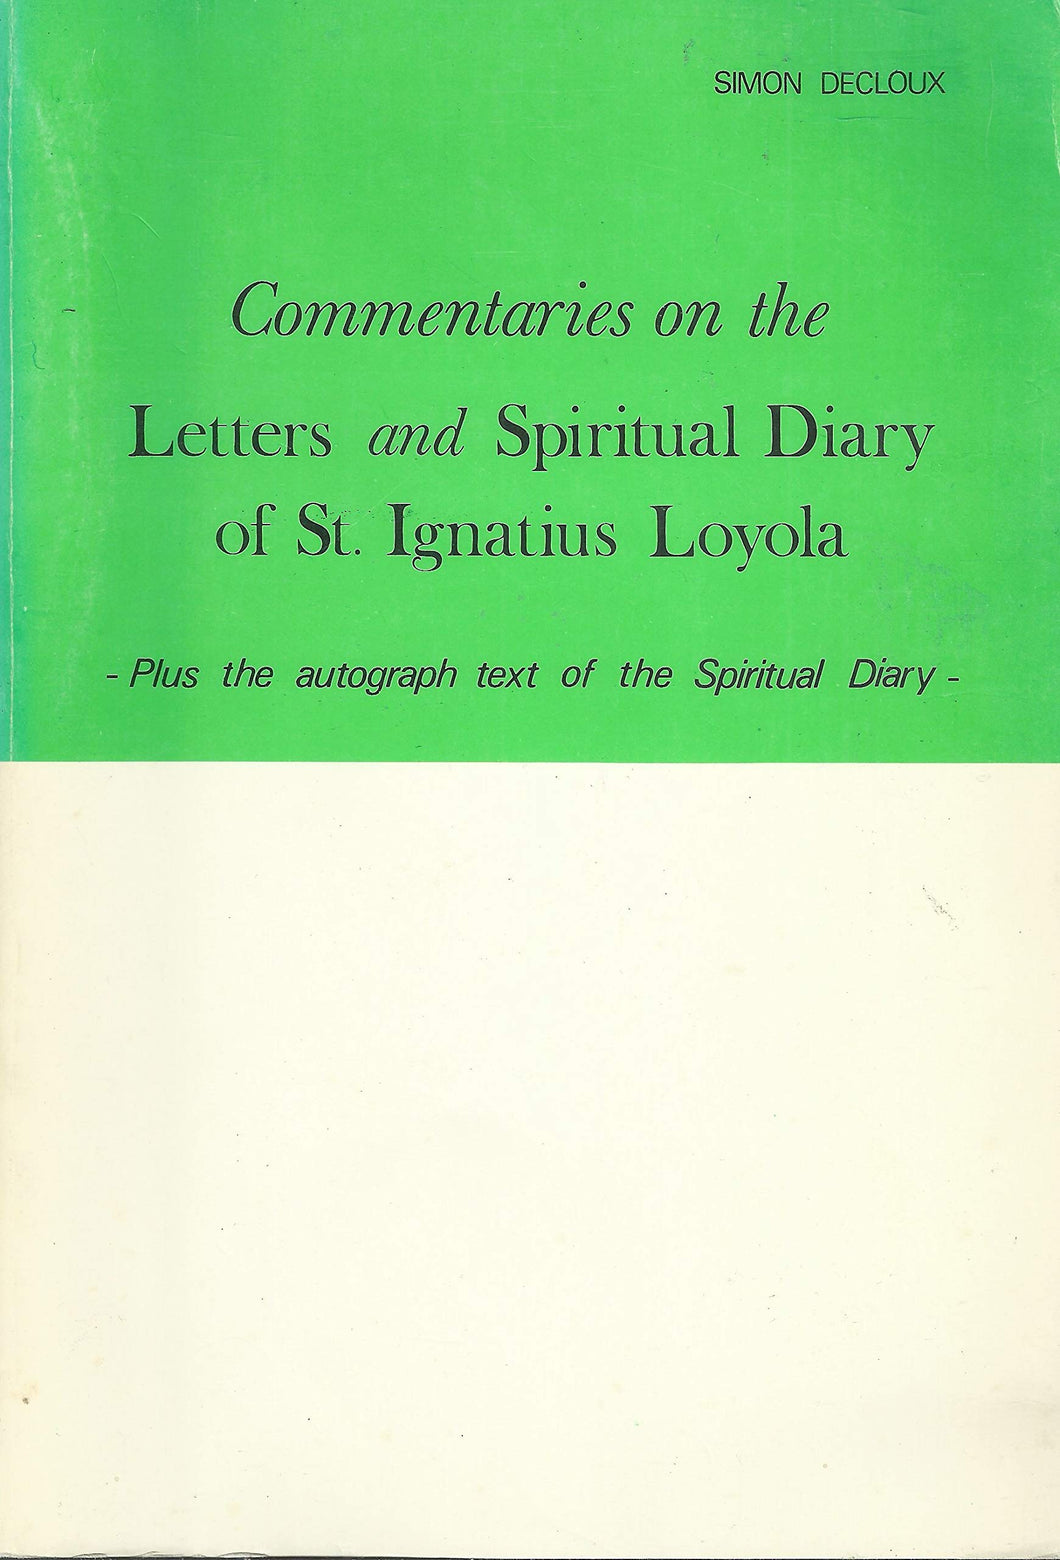 Commentaries on the letters and spiritual diary of St. Ignatius Loyola